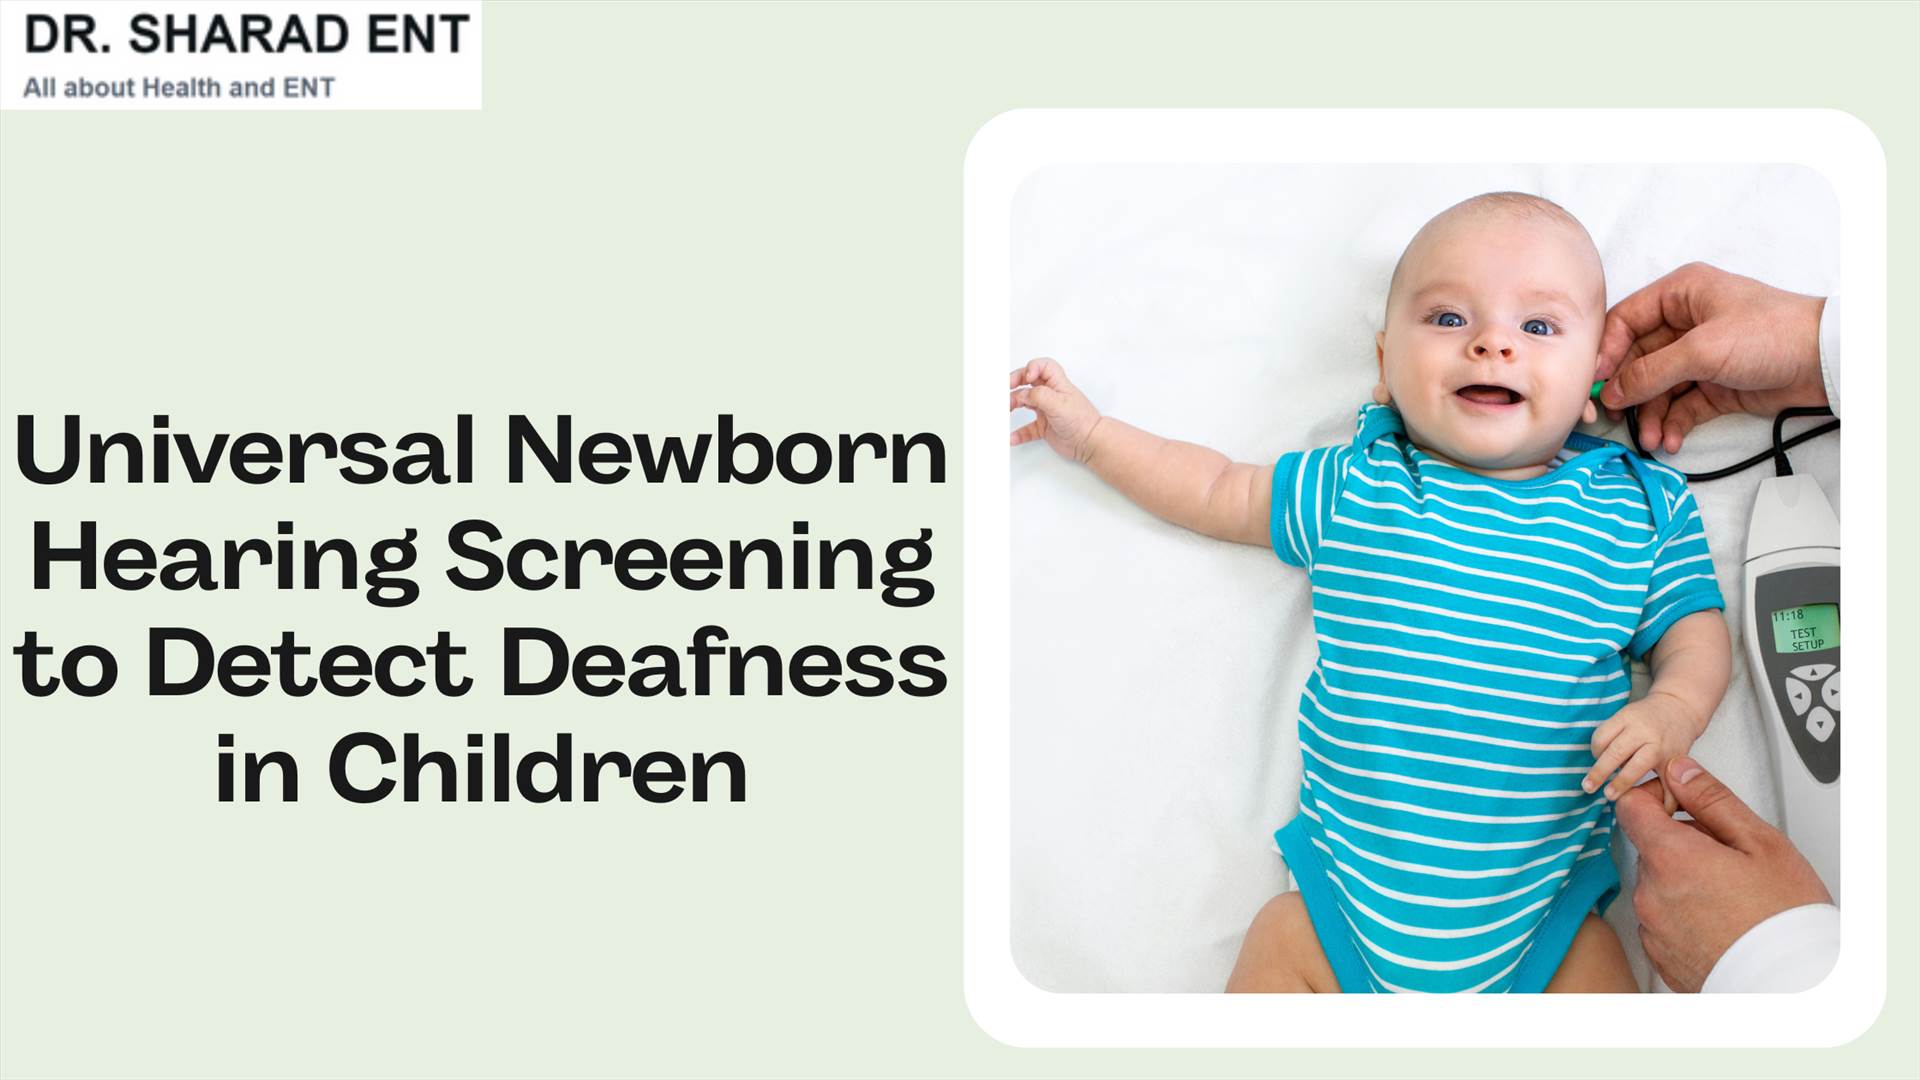 Universal Newborn Hearing Screening to Detect Deafness in Children.png  by Dr Sharad